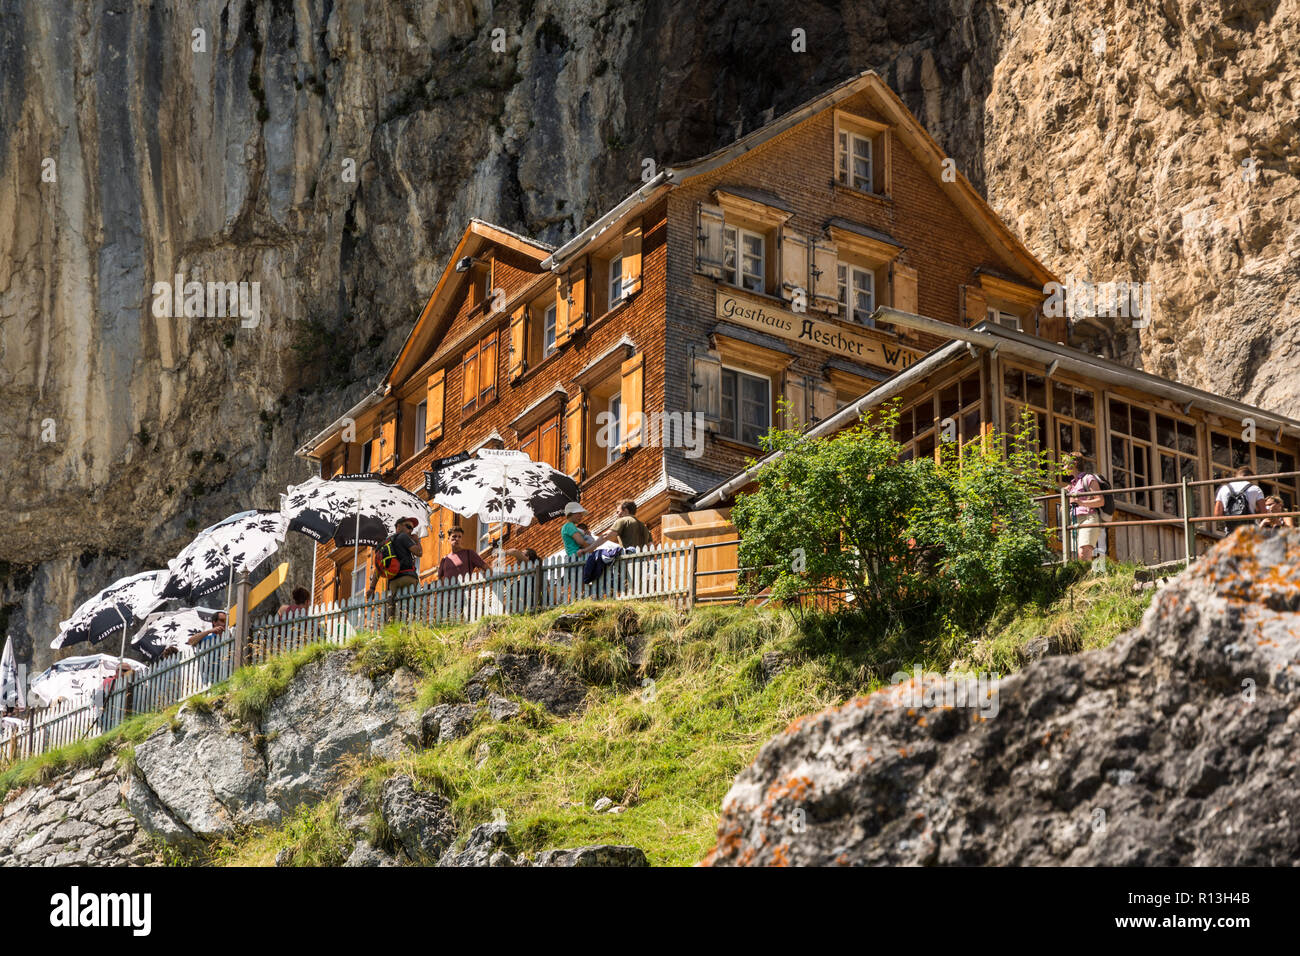 APPENZELL, SWITZERLAND - AUGUST 7, 2016: Tourists enjoying relaxing time at Aesher mountain hut in Swiss Alps near Appenzell during hot August of 2016 Stock Photo